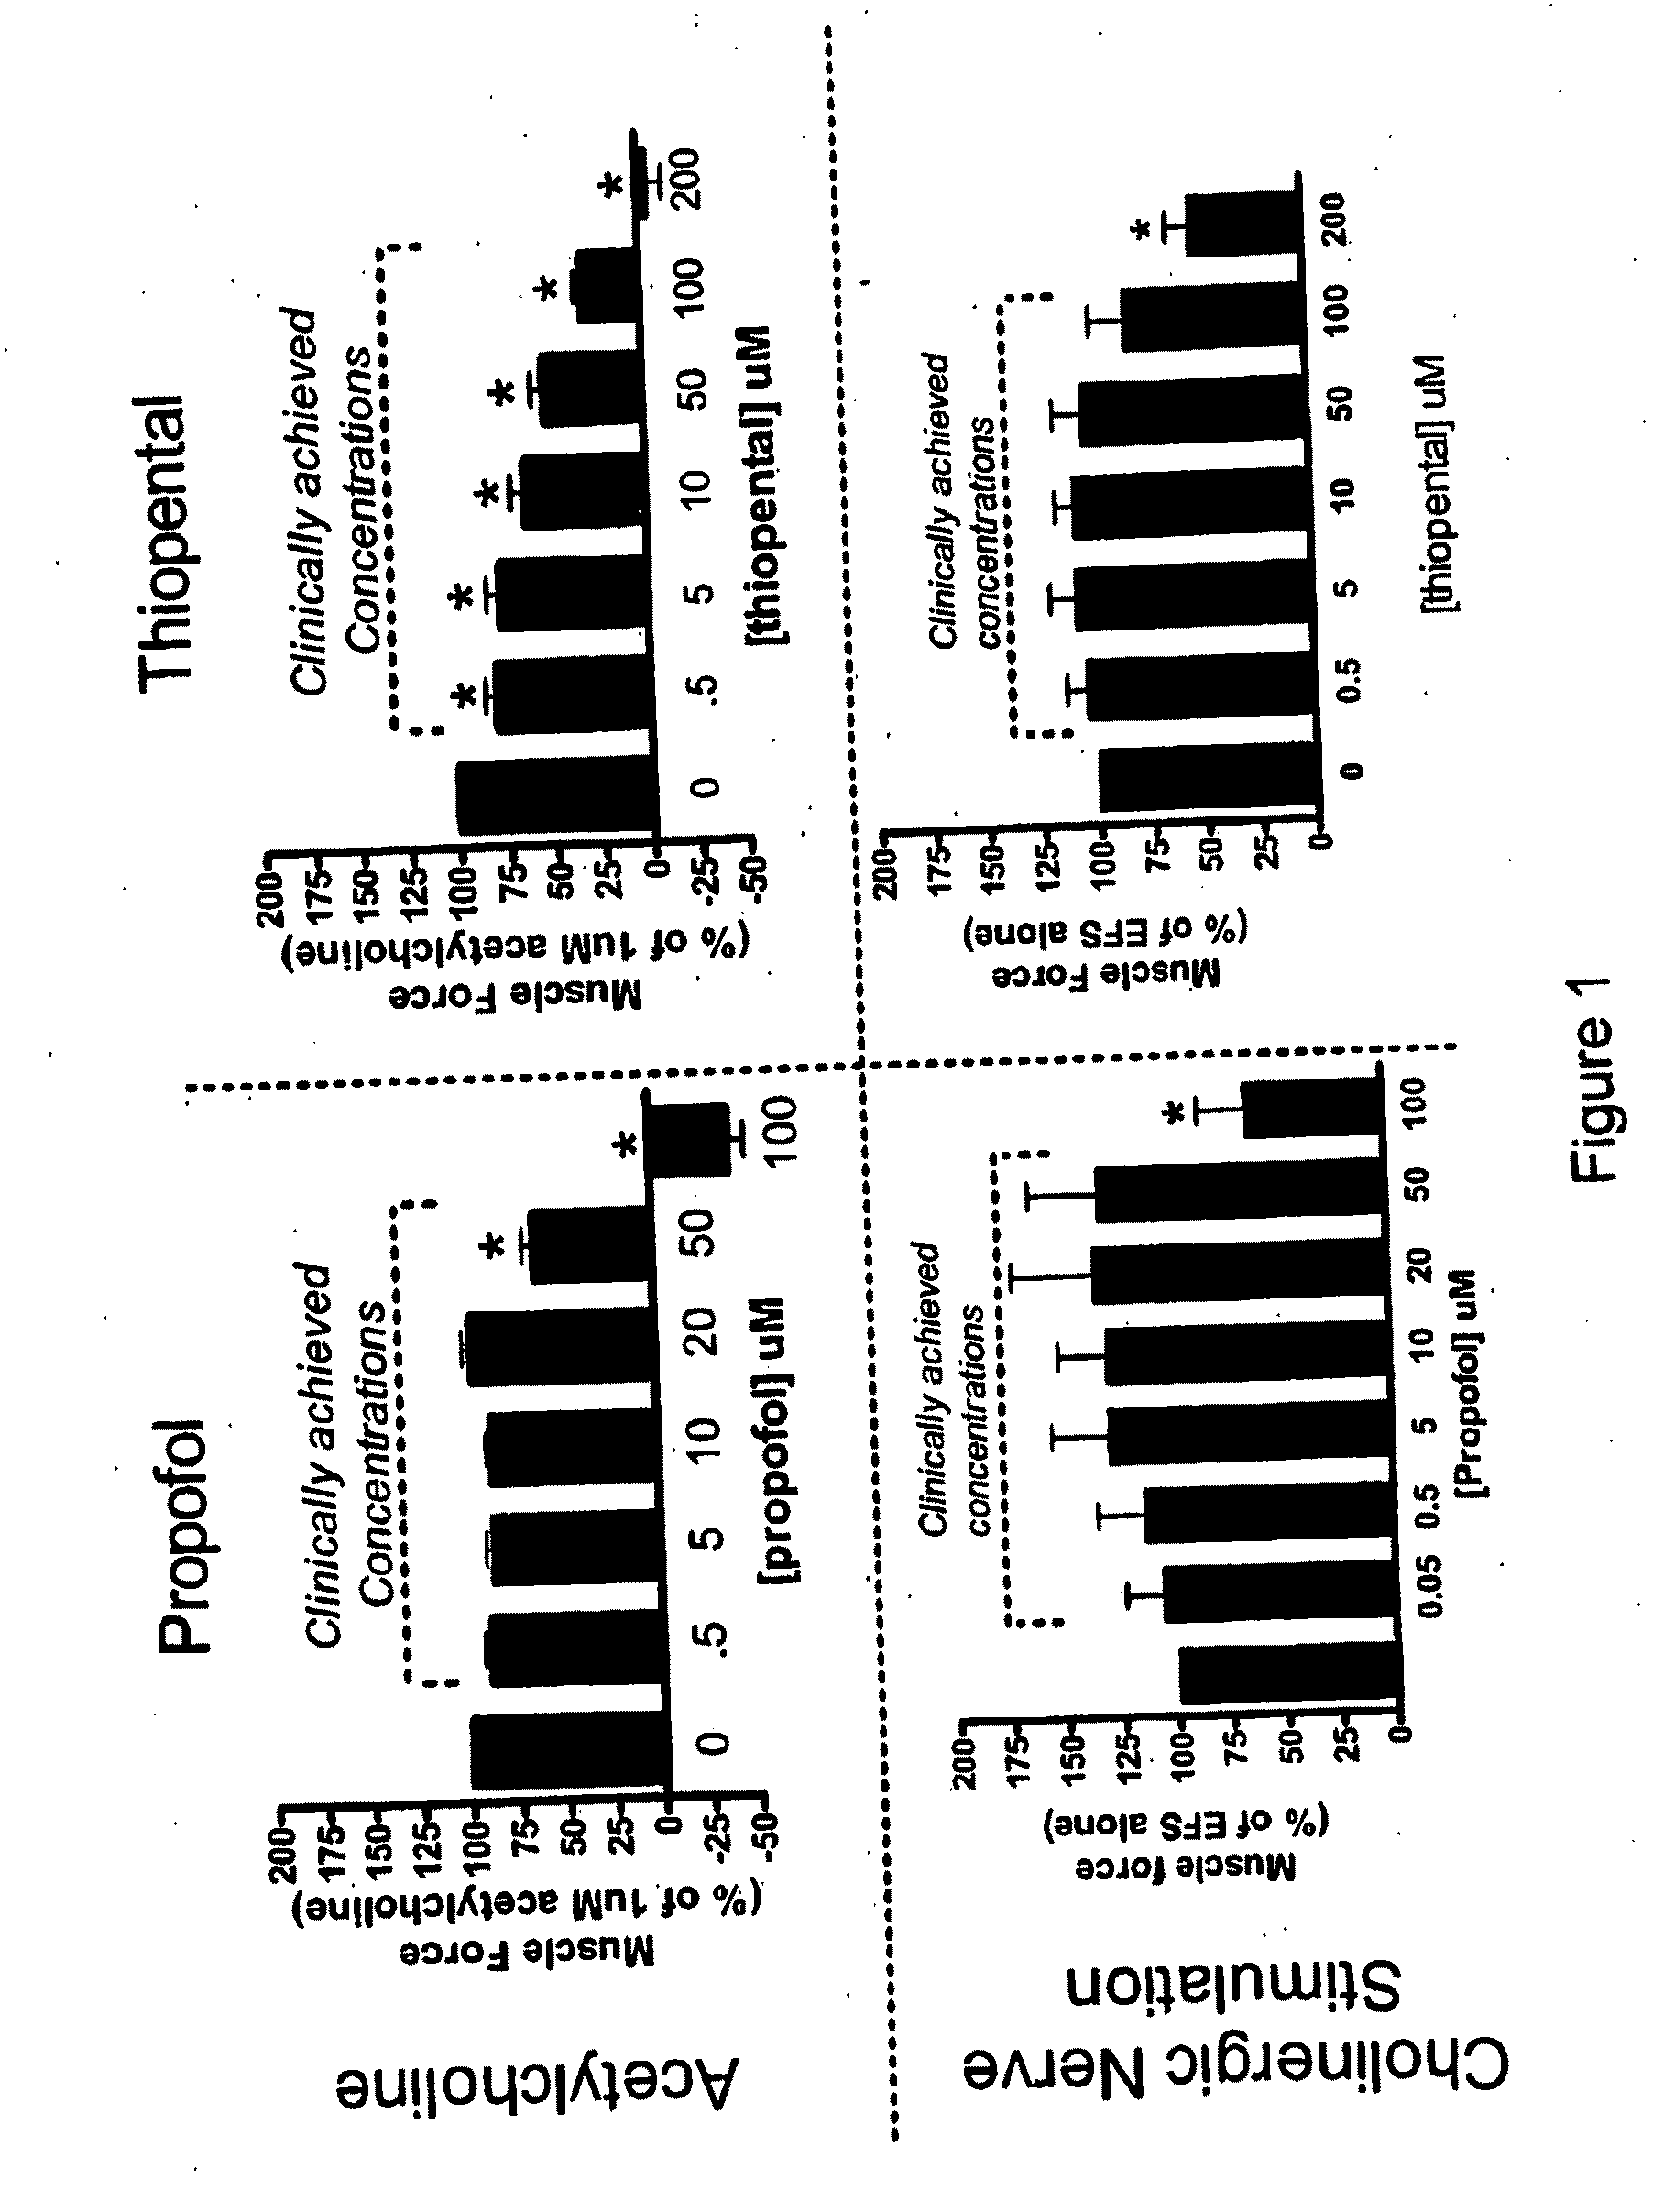 Method of mediating Airway Smooth Muscle Construction Due to Airway Irritation